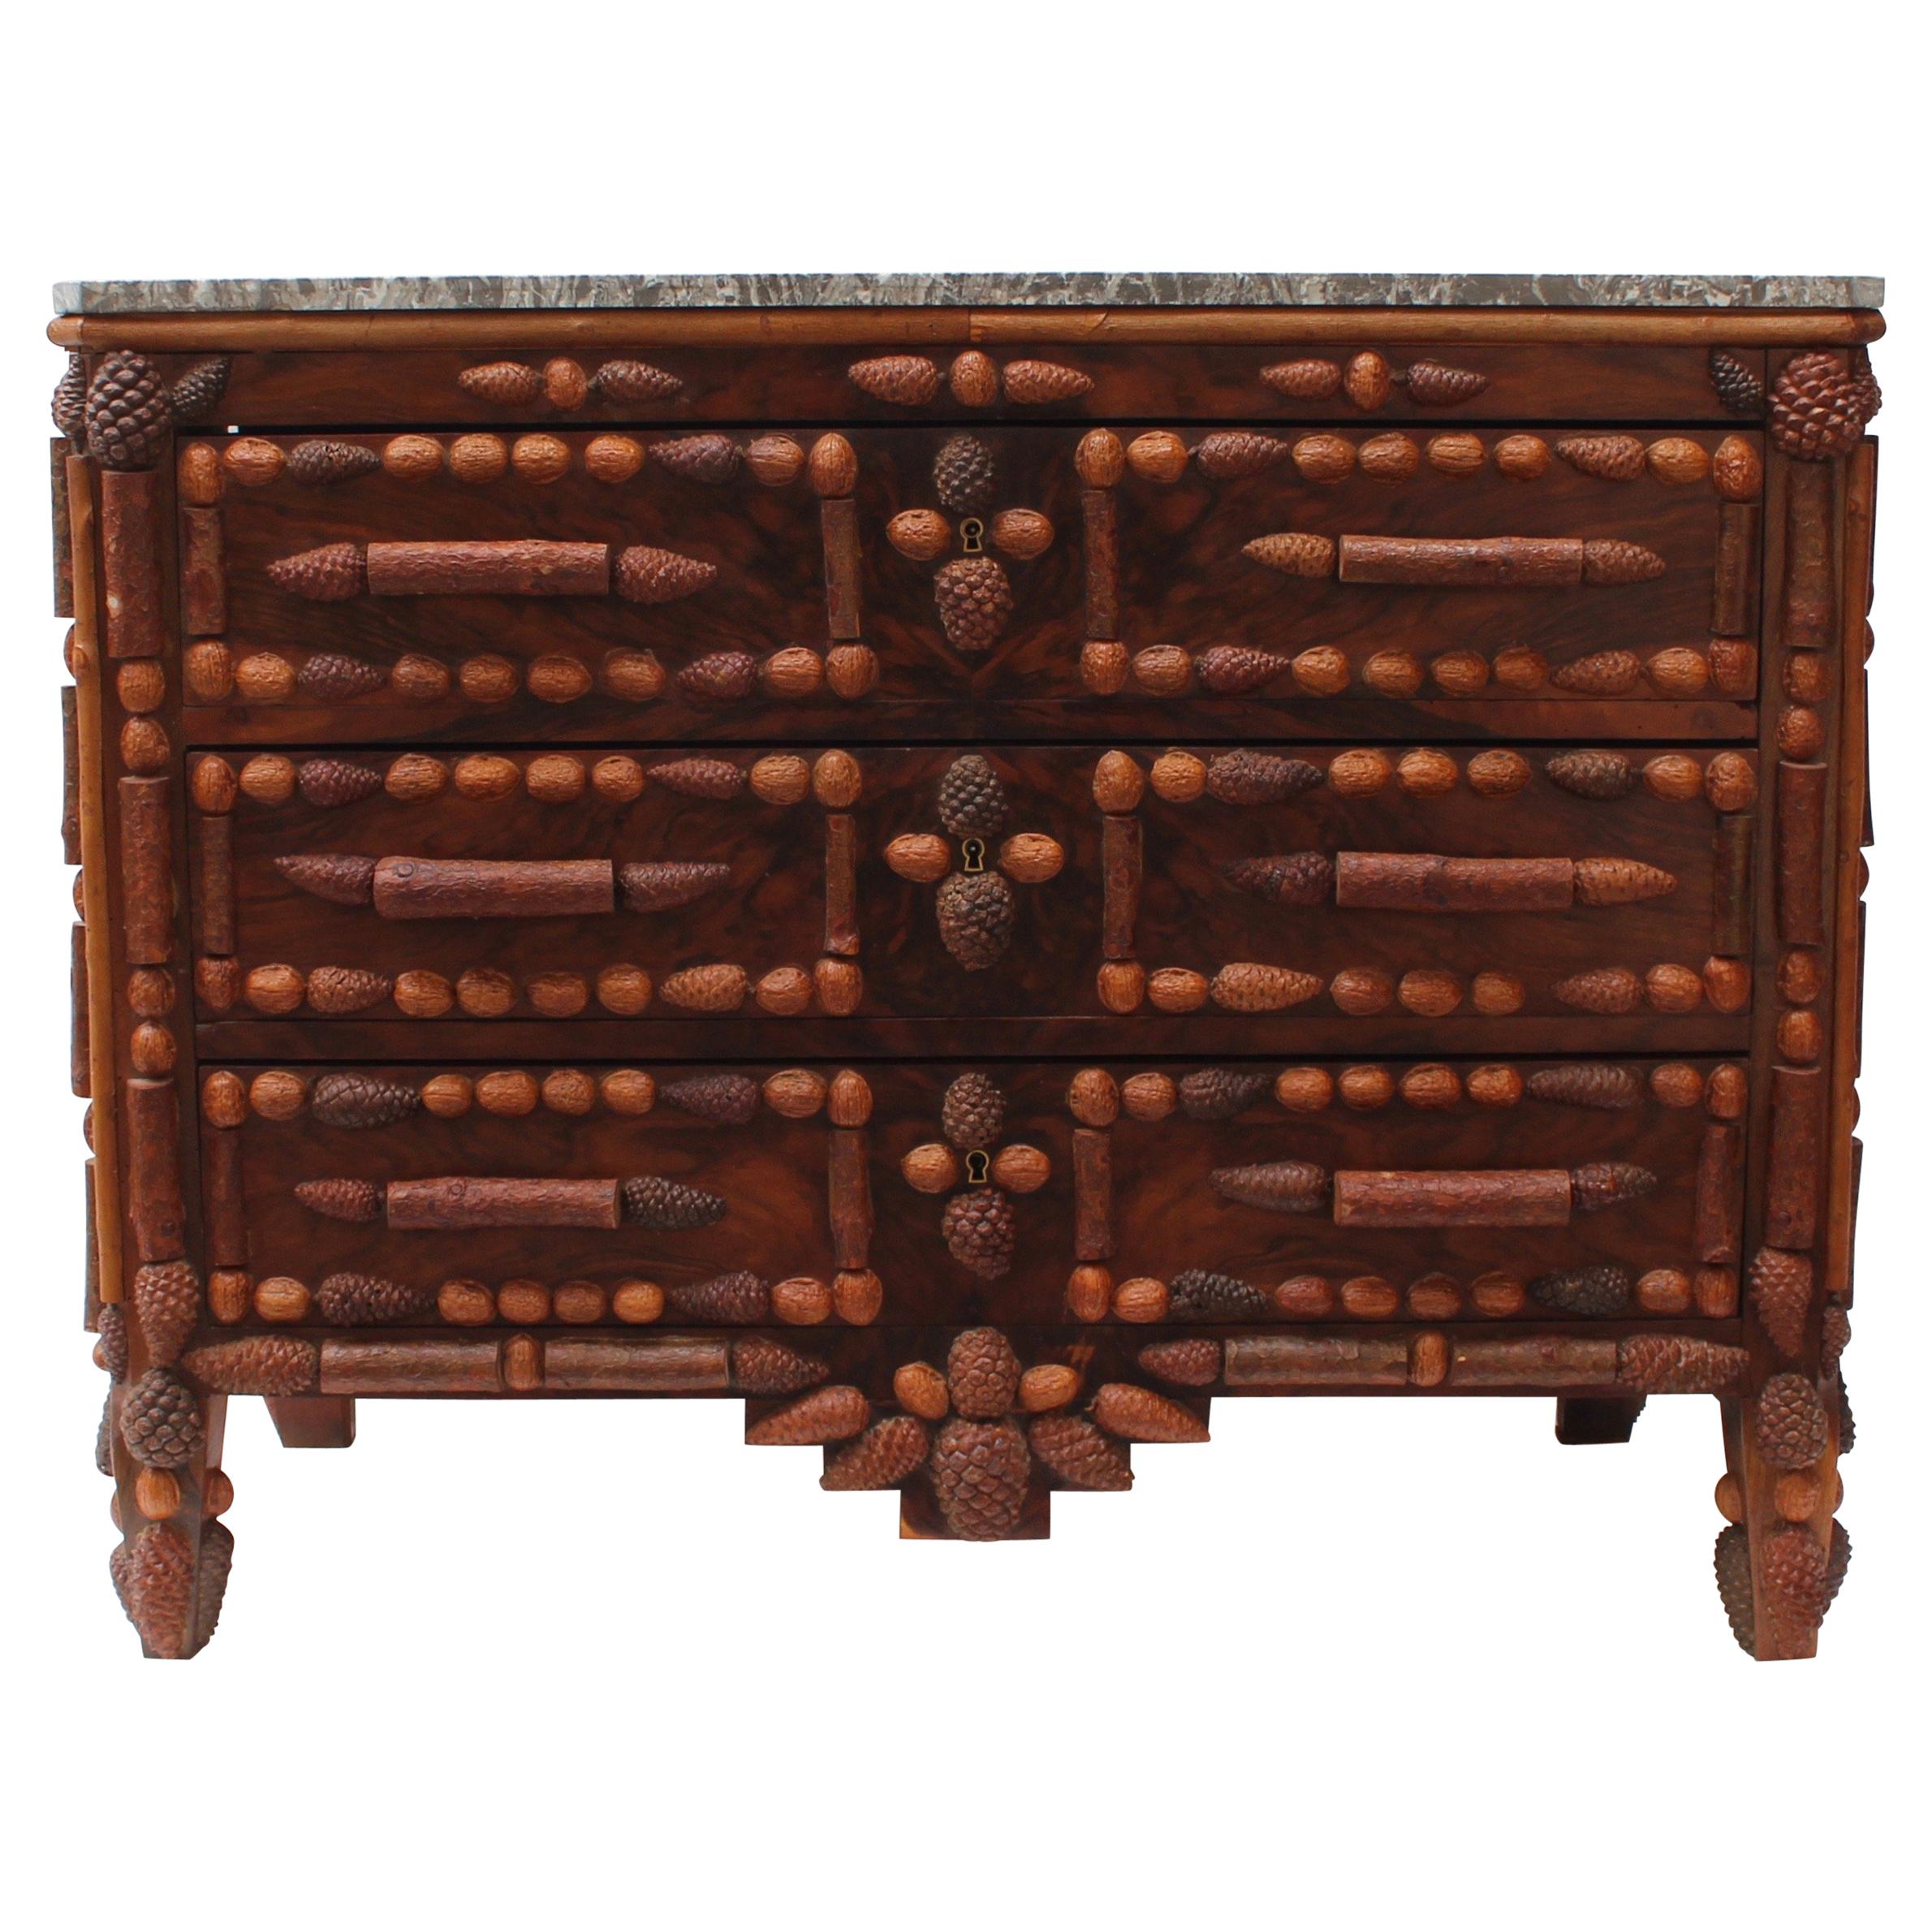 Italian Walnut and Pinecone Decorated Chest of Drawers with Marble Top